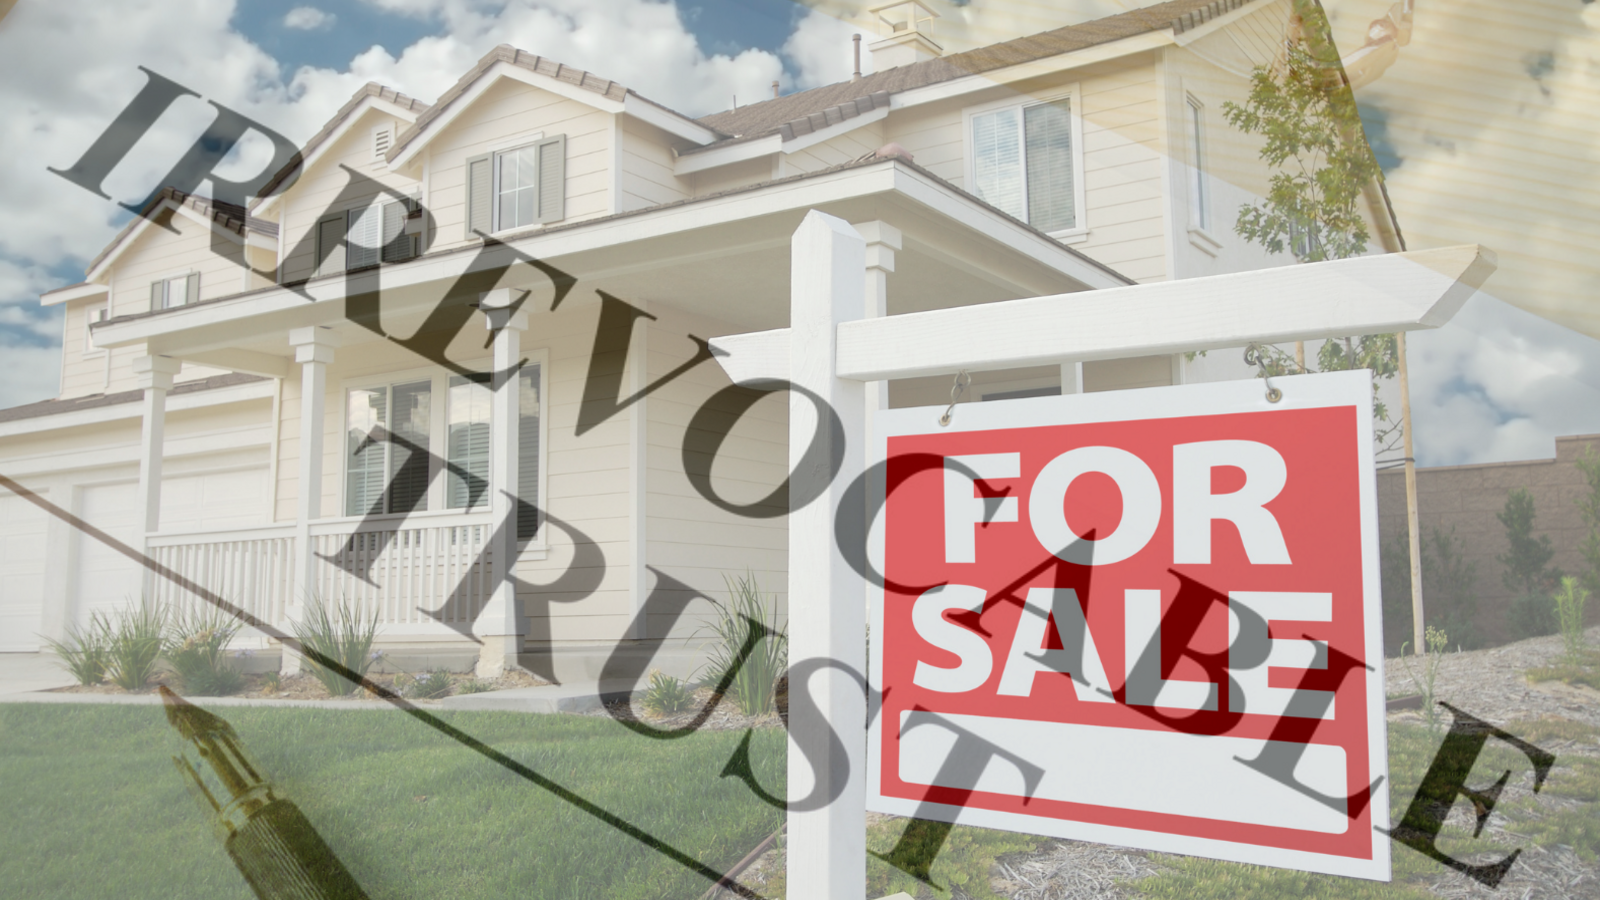 Can A House That Has An Irrevocable Trust Be Sold?